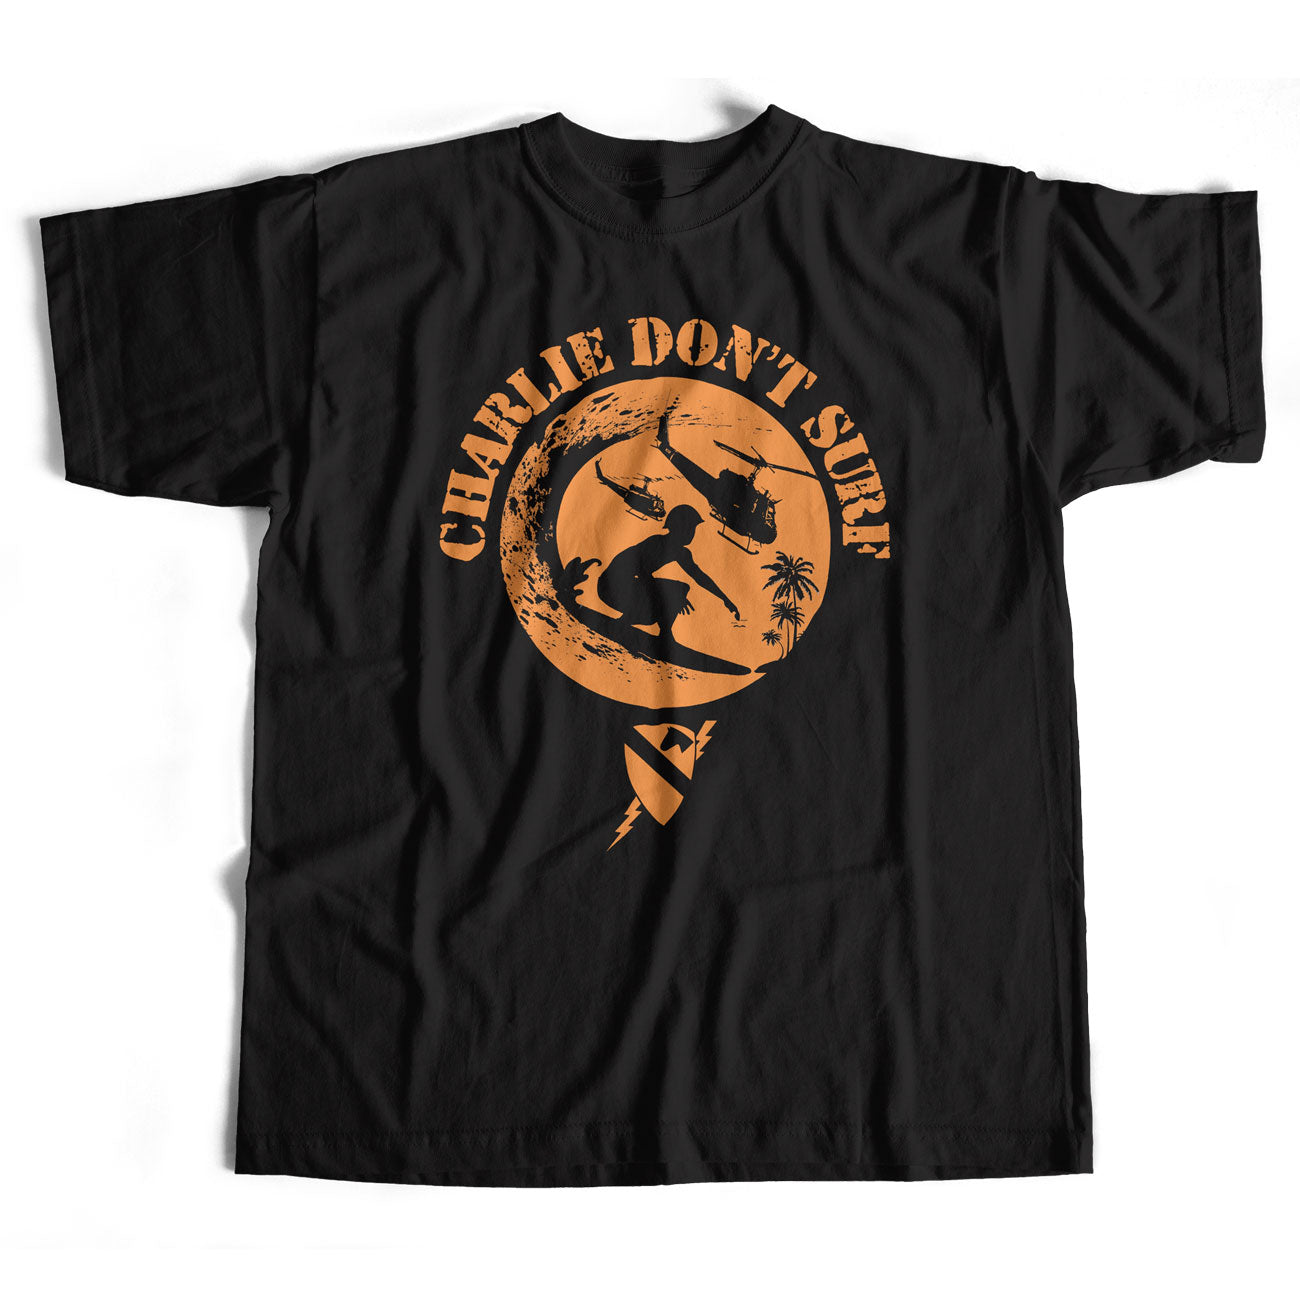 Charlie Don't Surf Circle Cavalry Crest T Shirt